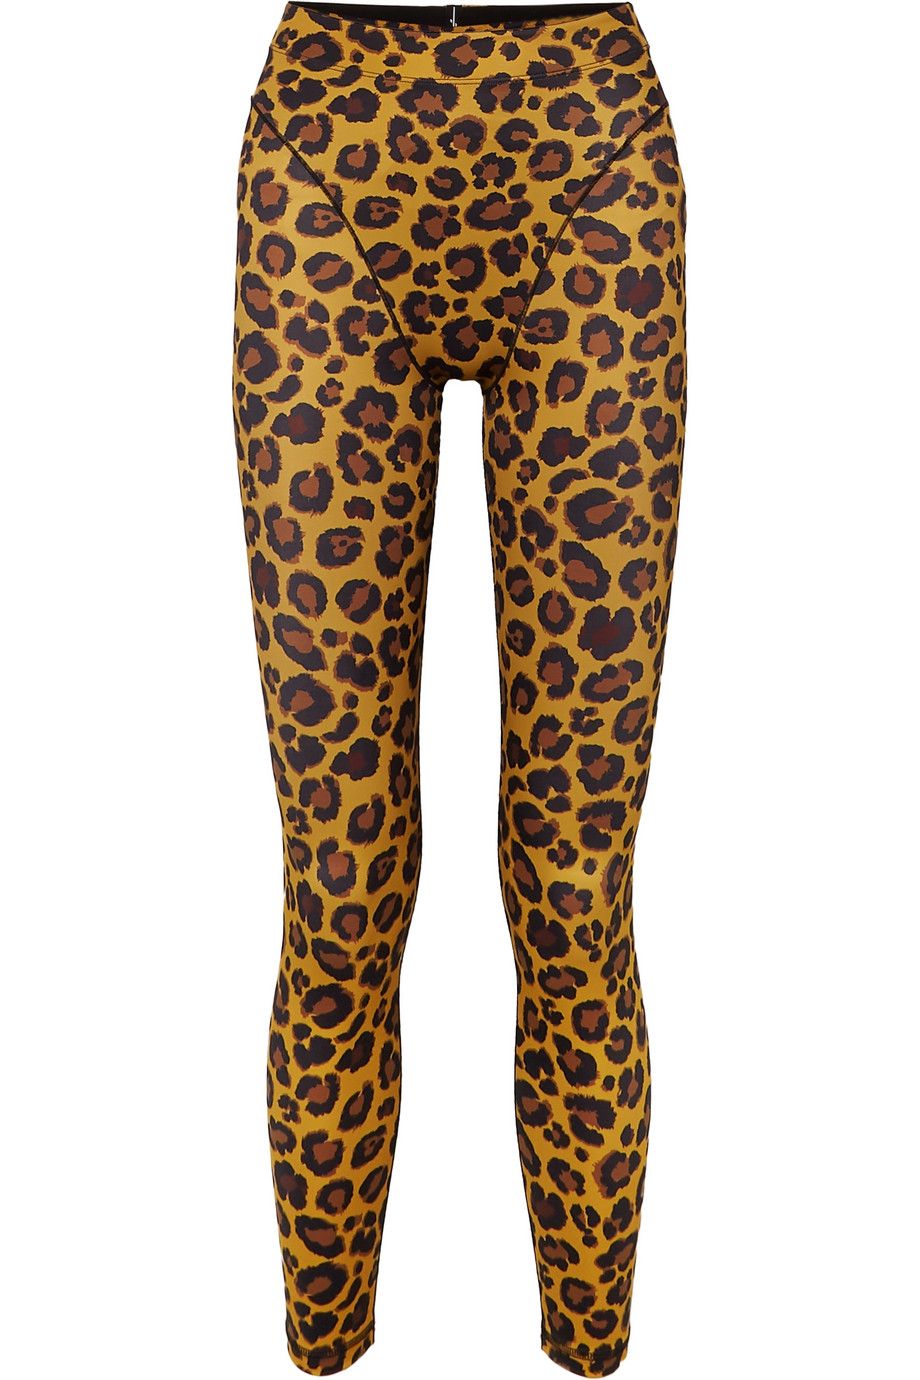 Adam Selman Sport Snake-Print Stretch Leggings, These 28 Cute Workout Sets  Will Help Motivate You to Crush Your 2020 Fitness Goals